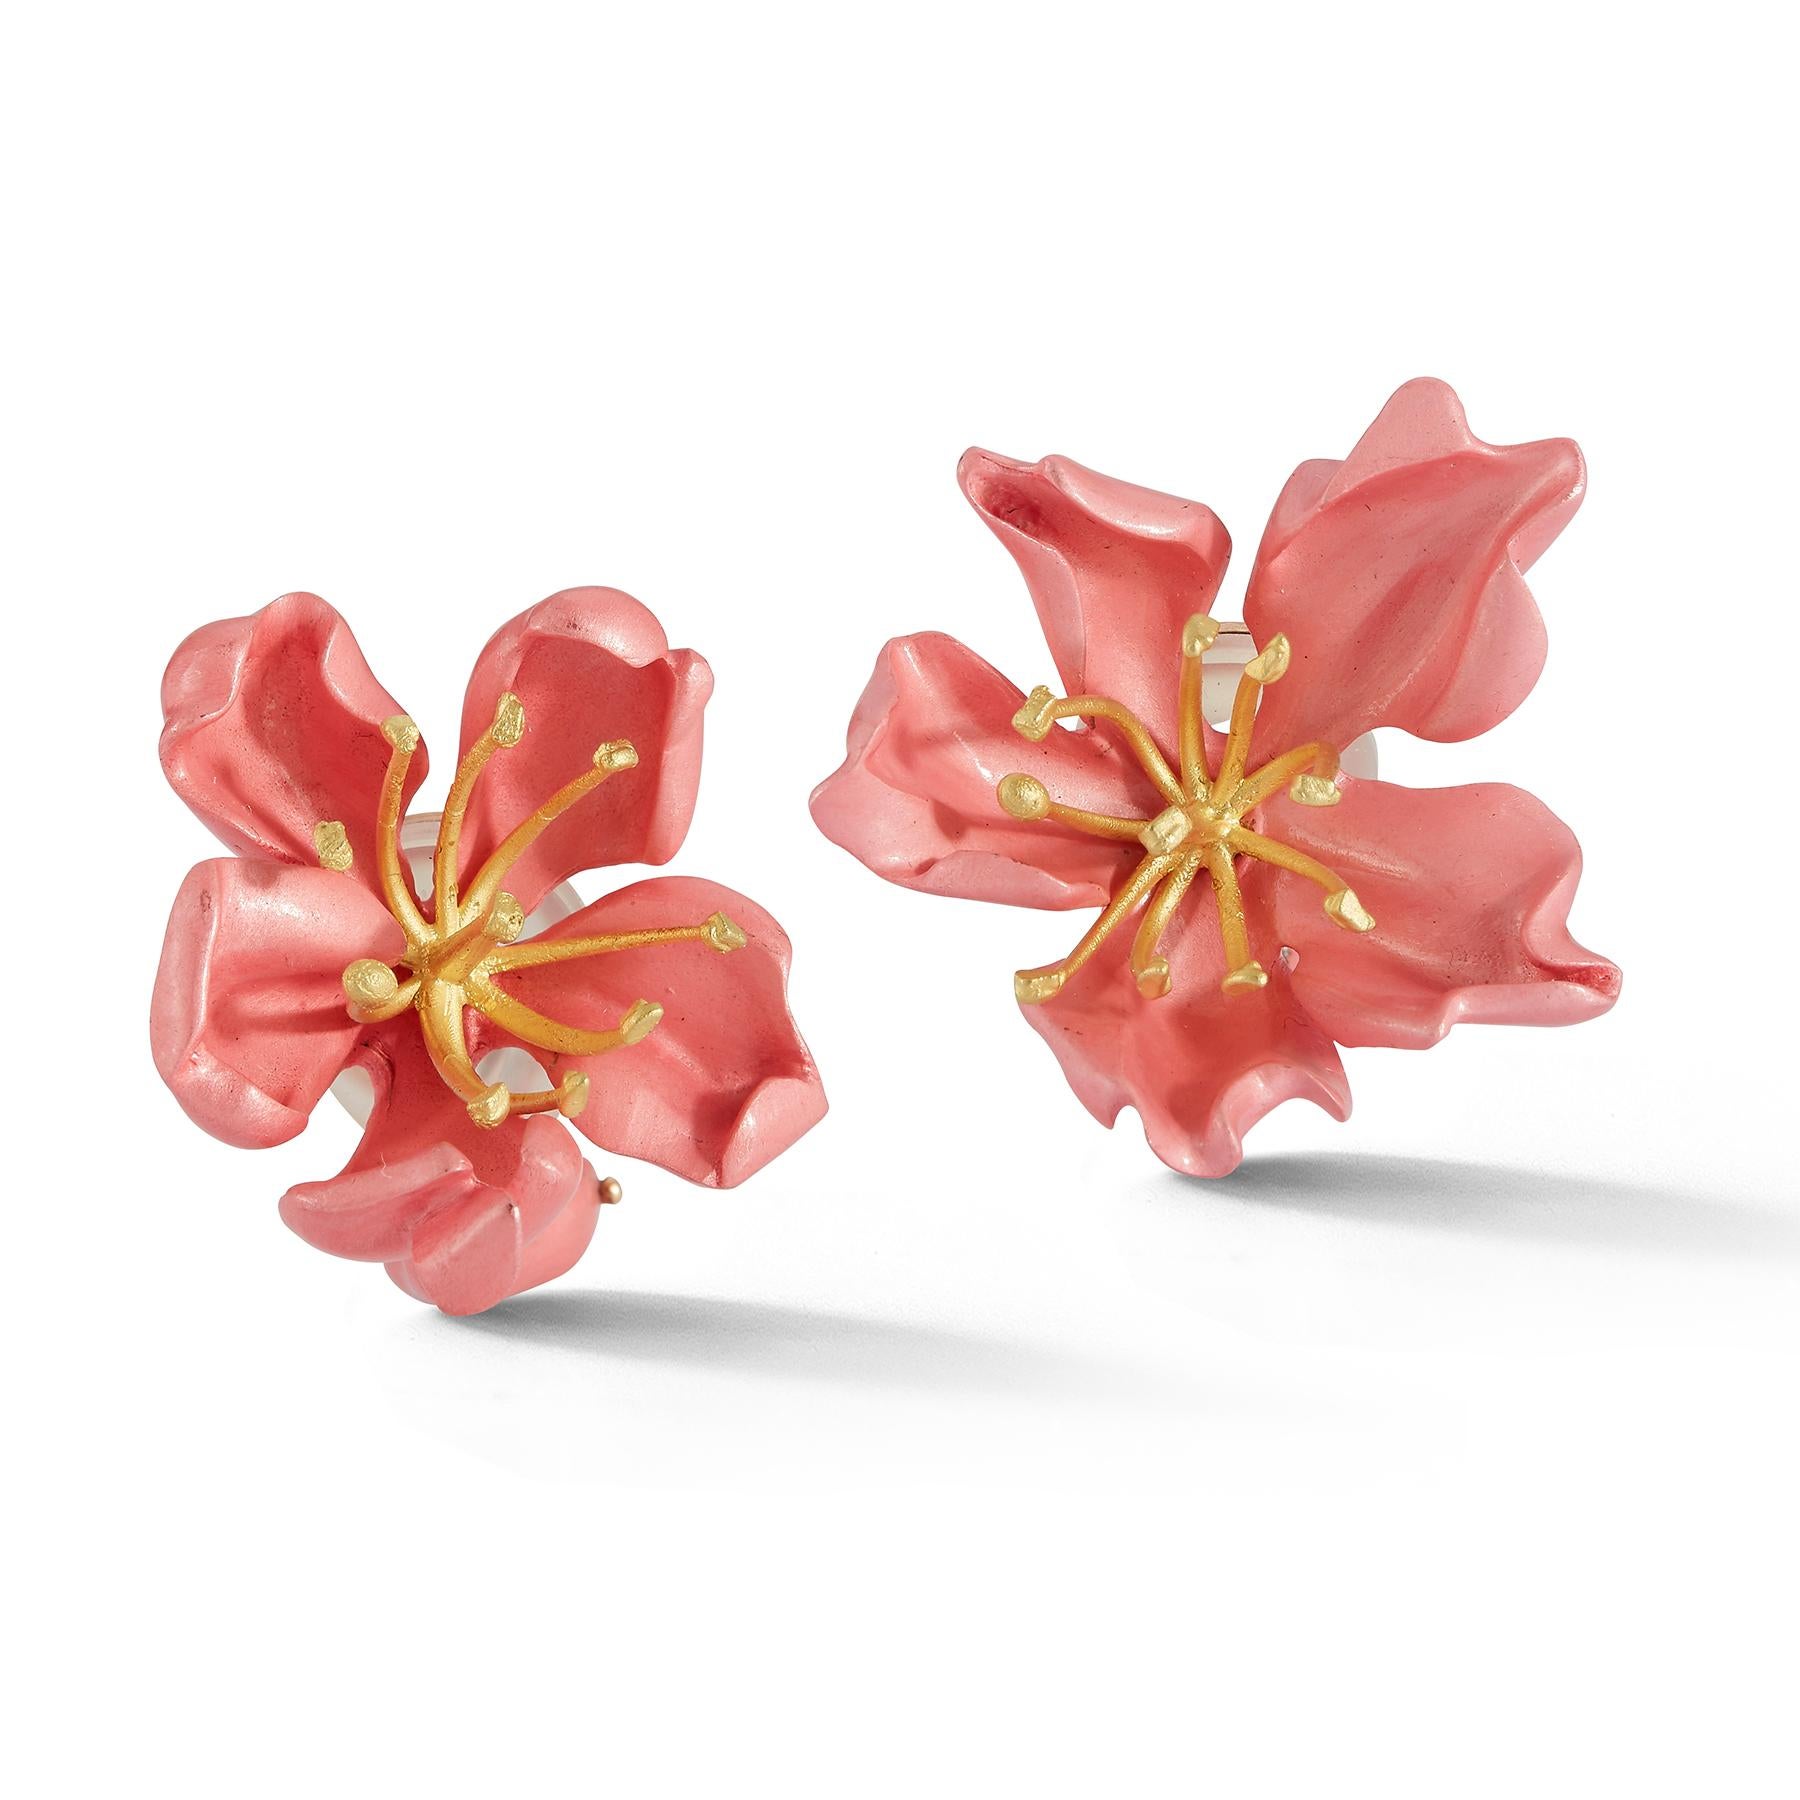 Pink Enamel Almond Blossom Earrings by JAR

A pair of 18 karat yellow gold and silver flower earrings with pink enamel pedals

Signed JAR Paris and numbered

Accompanied by original pouch

Length: 1.25